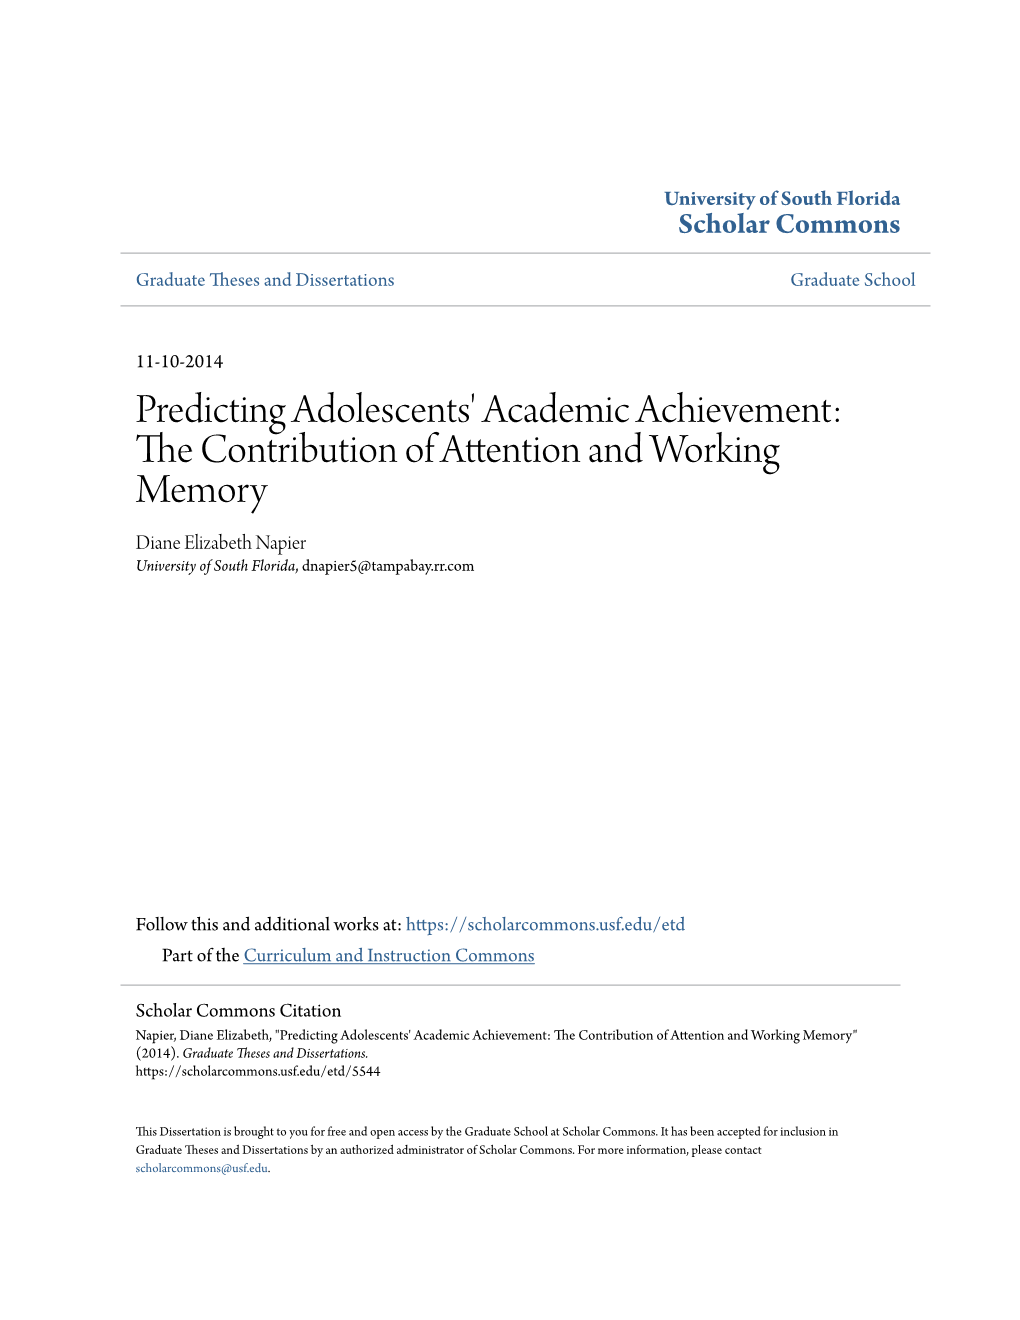 Predicting Adolescents' Academic Achievement: the Contribution of Attention and Working Memory